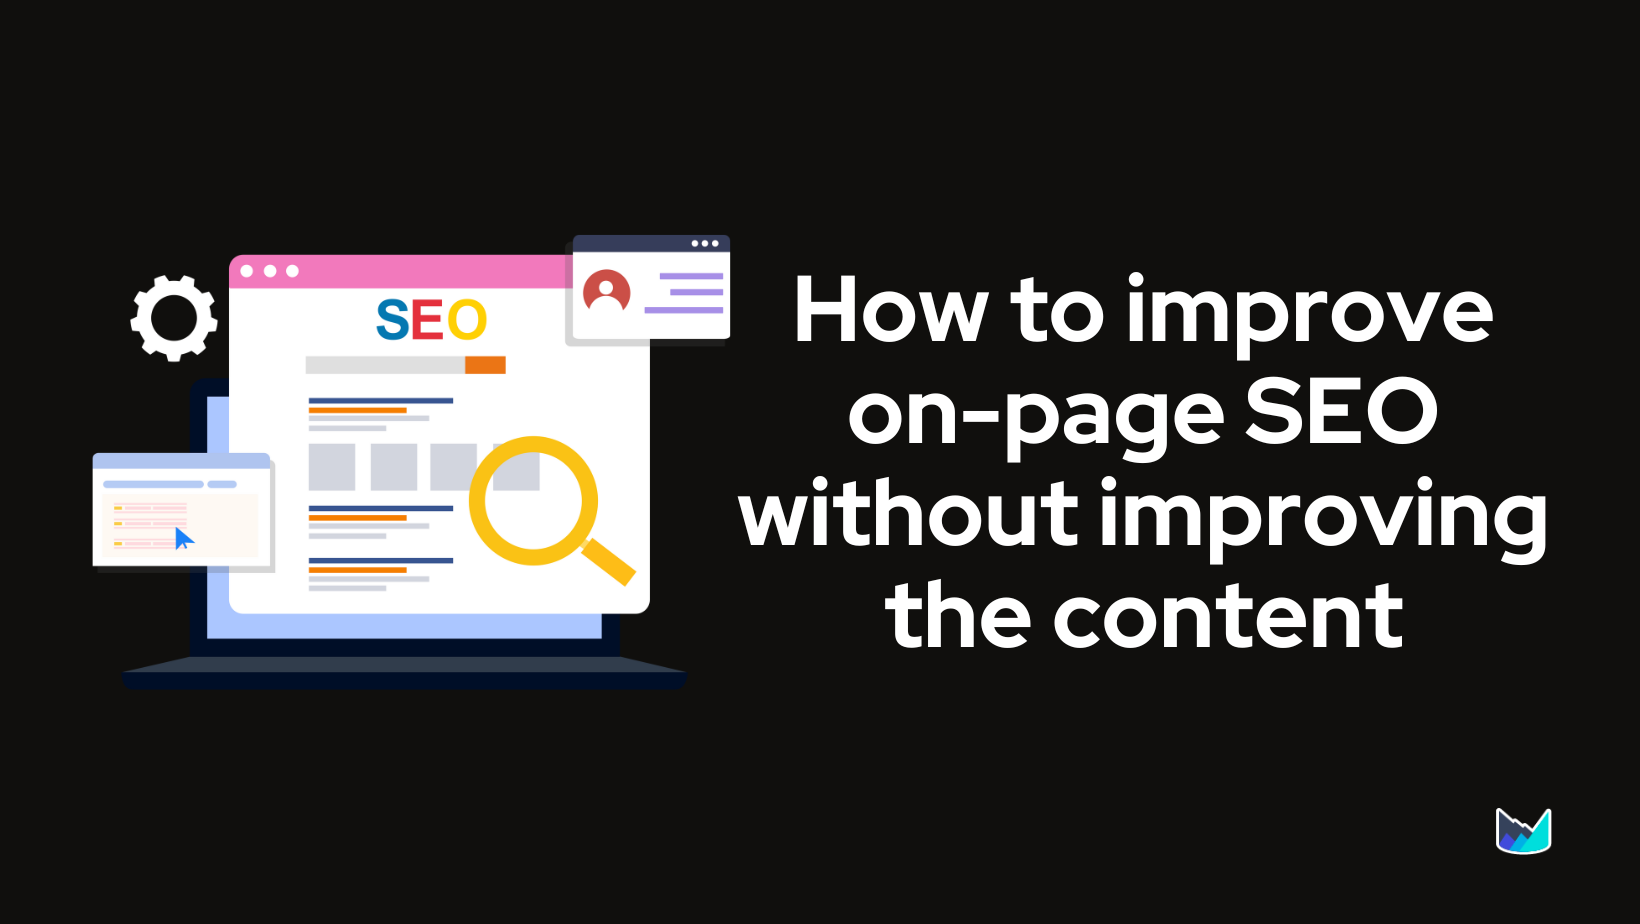 How to improve on-page SEO without improving the content